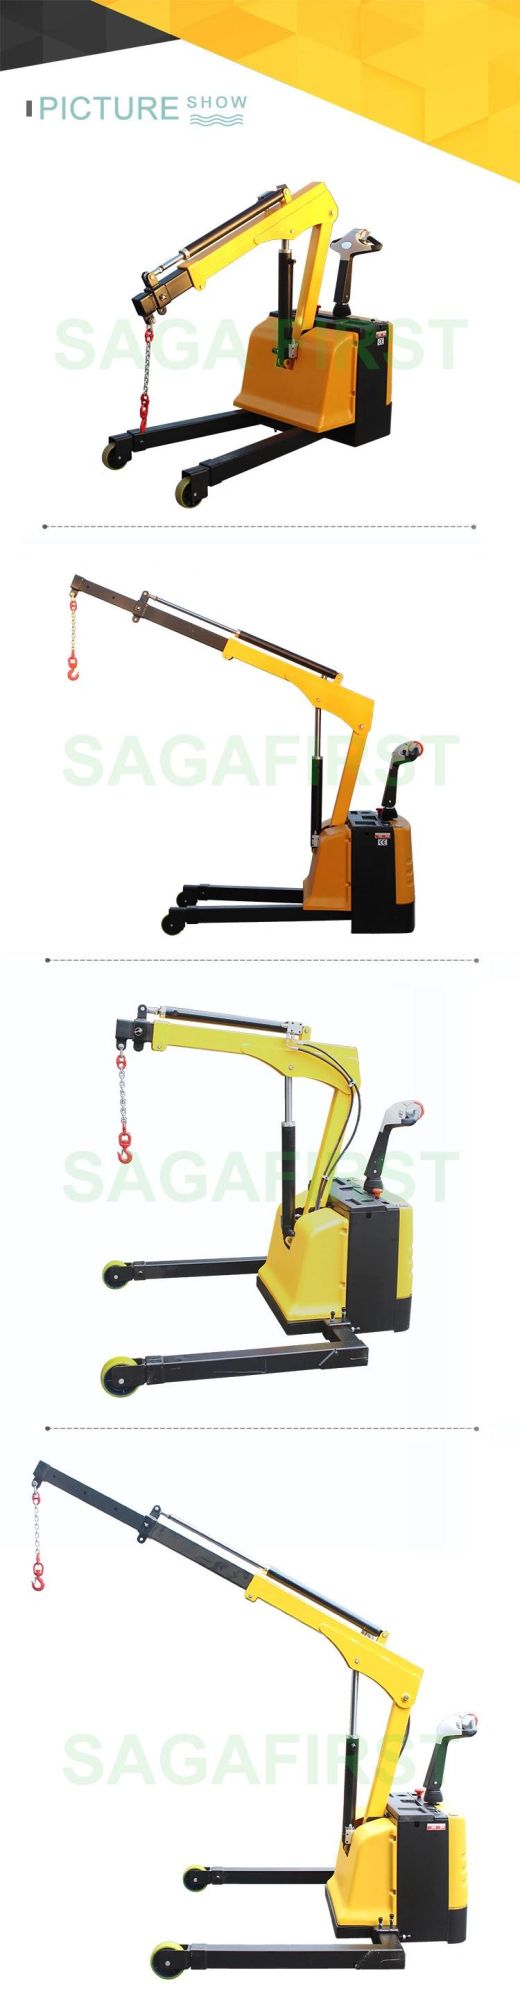 CE Certified Electric Jib Pickup Crane for Warehouse Use